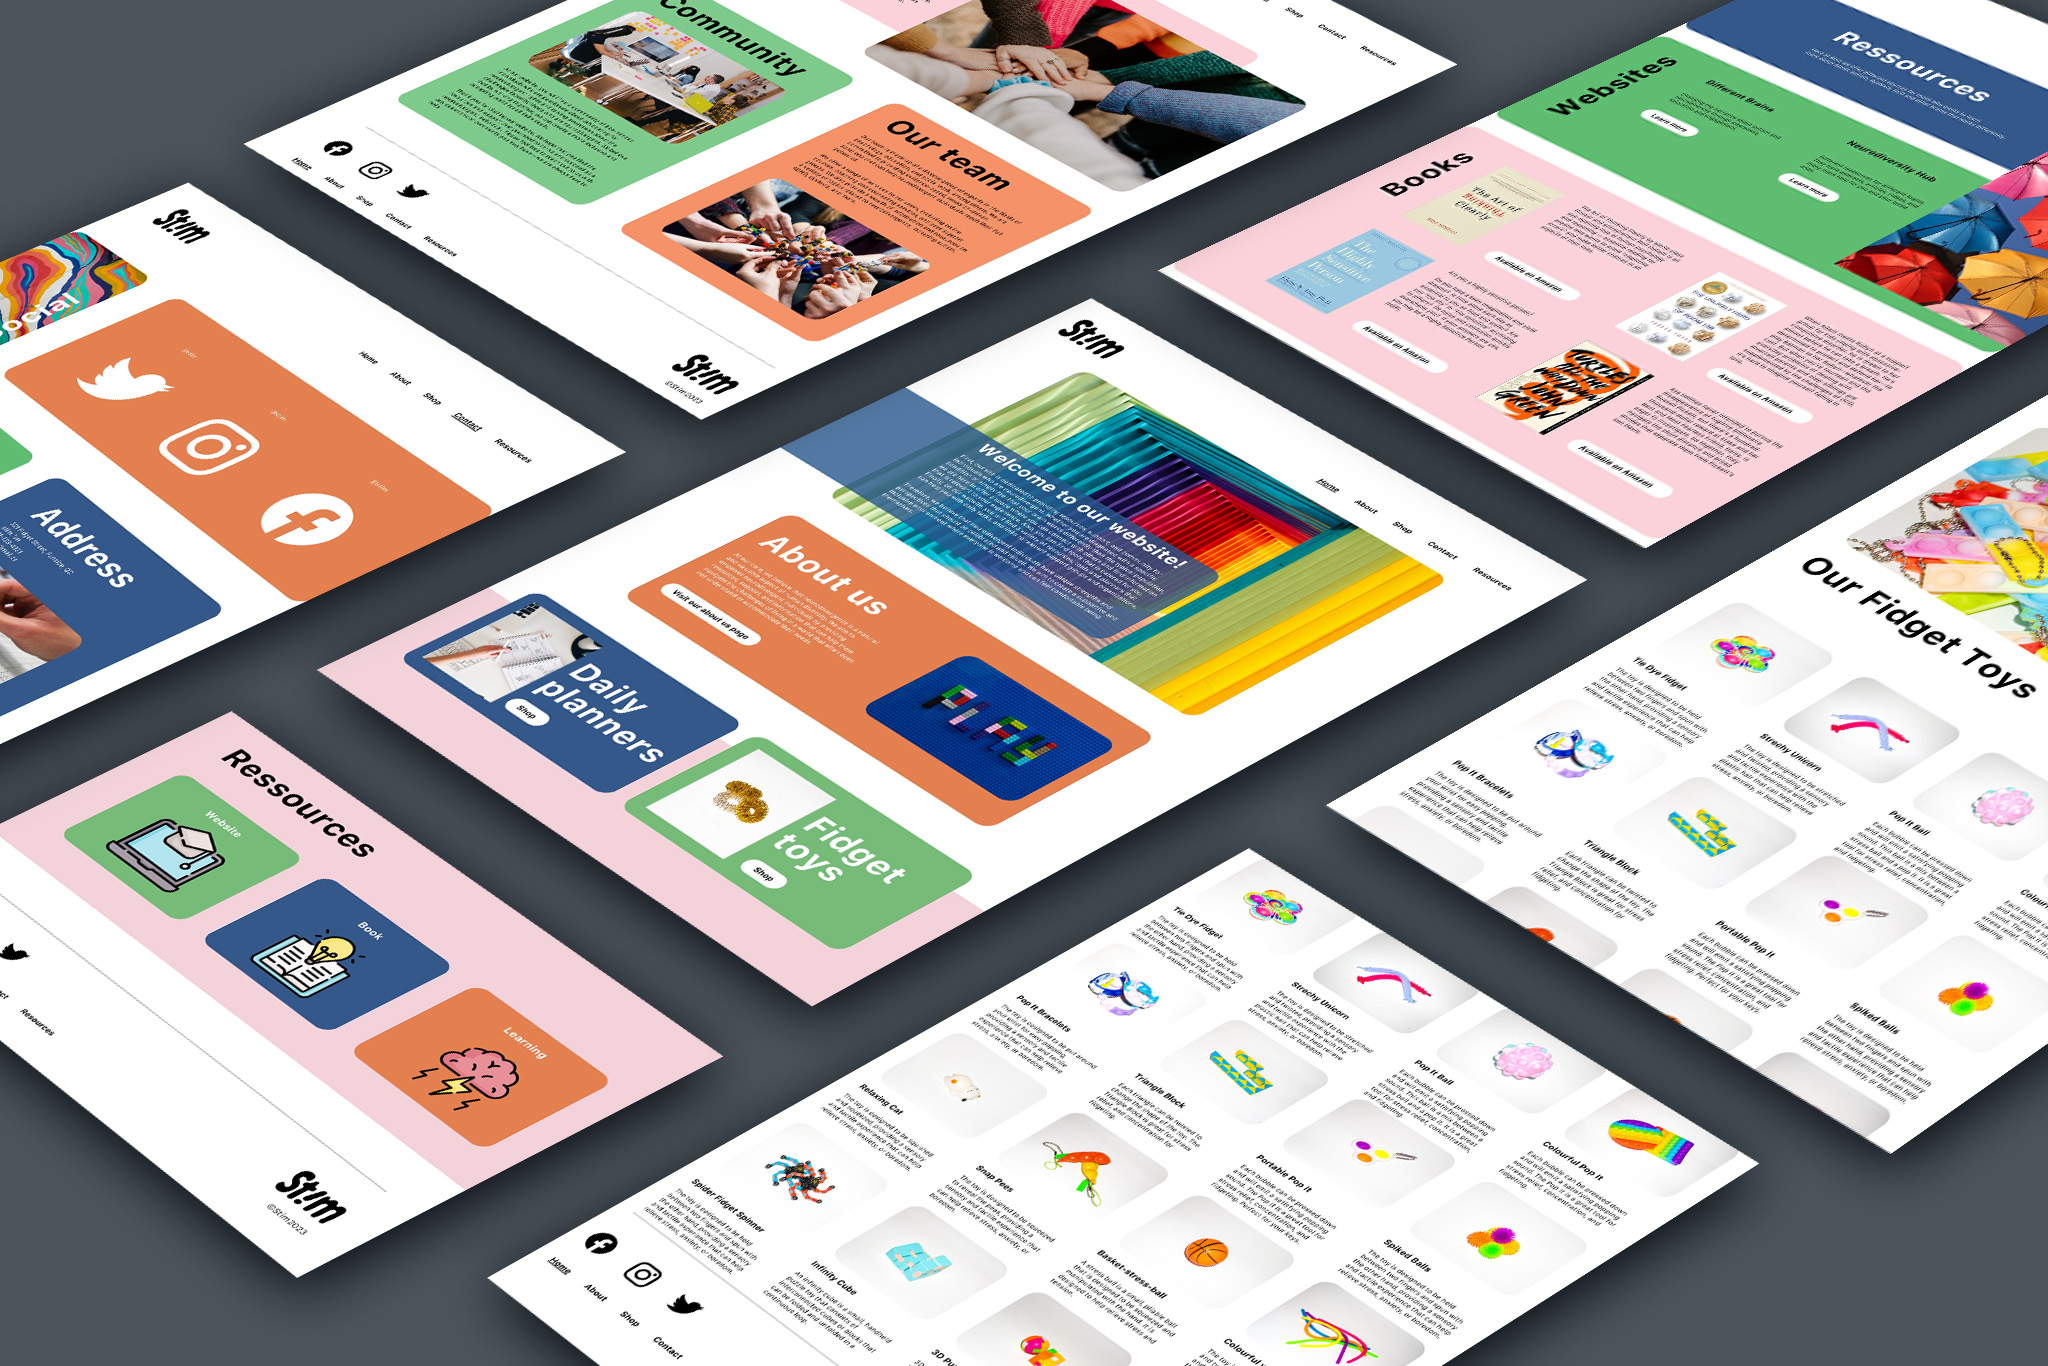 Colourful website mockup on sheets of paper.